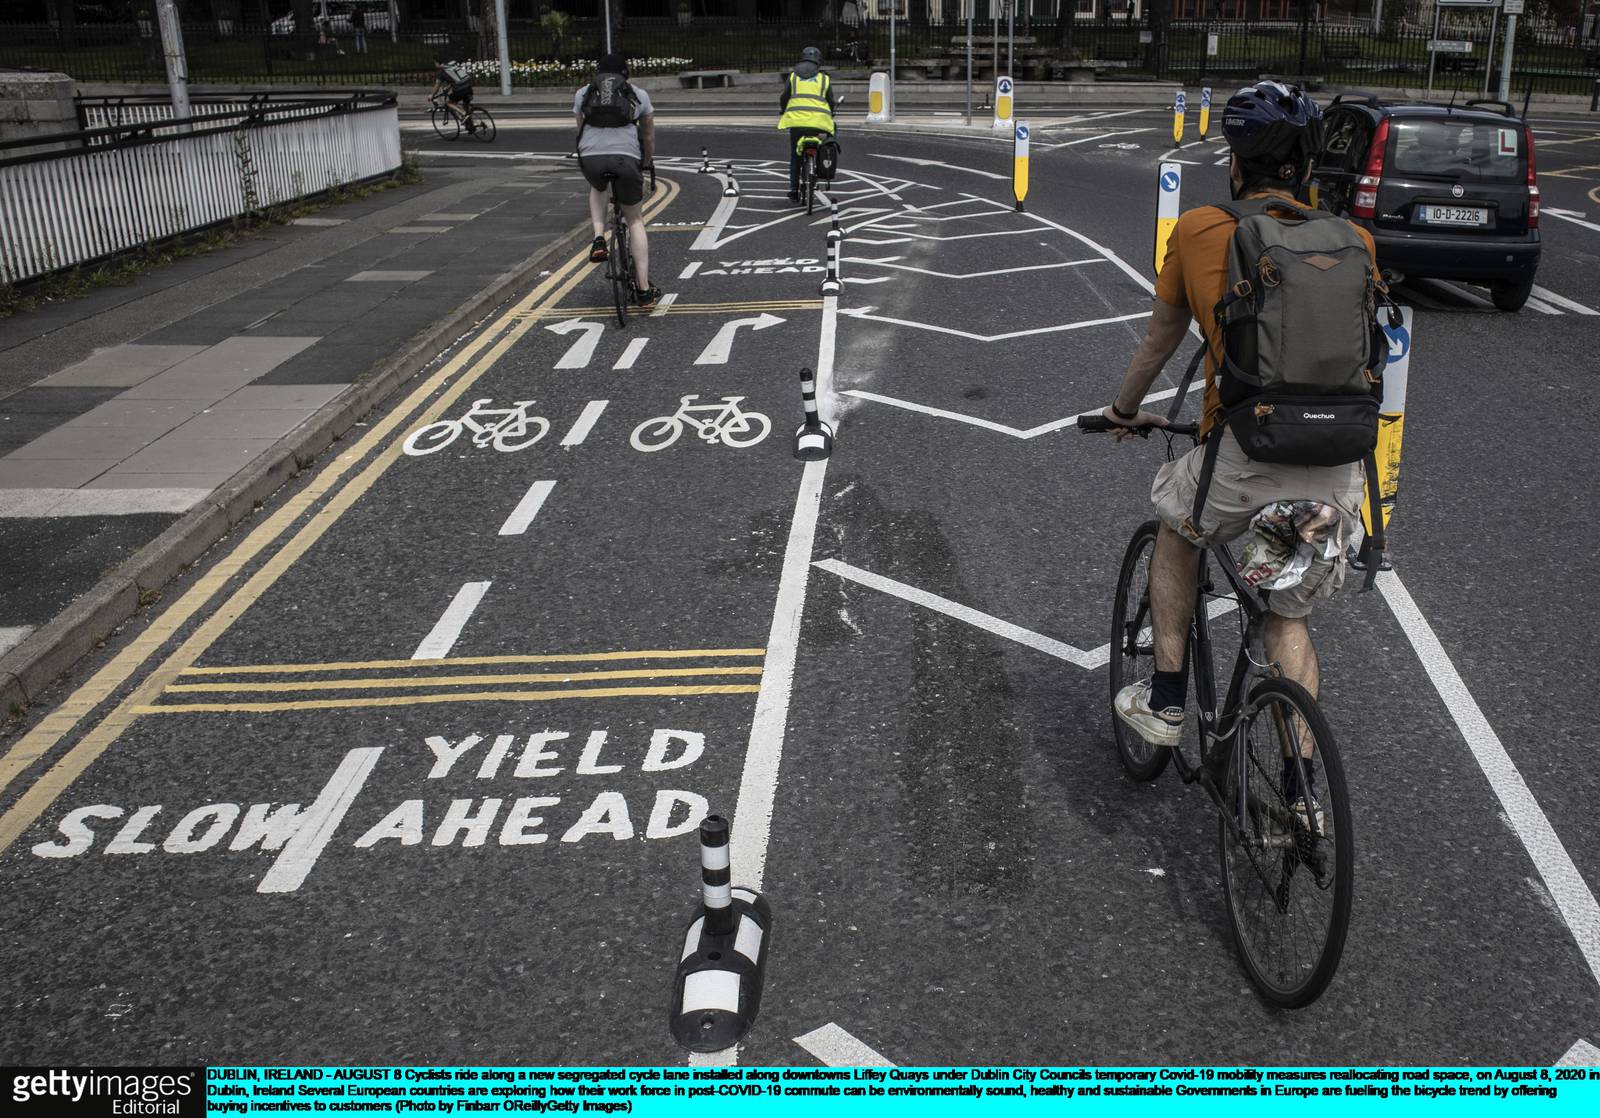 DUBLIN, IRELAND - AUGUST 8: Cyclists ride along a new segregated cycle lane installed along downtown's Liffey Quays under Dublin City Council's temporary Covid-19 mobility measures reallocating road space, on August 8, 2020 in Dublin, Ireland. Several European countries are exploring how their work force in post-COVID-19 commute can be environmentally sound, healthy and sustainable. Governments in Europe are fuelling the bicycle trend by offering buying incentives to customers. (Photo by Finbarr O'Reilly/Getty Images)